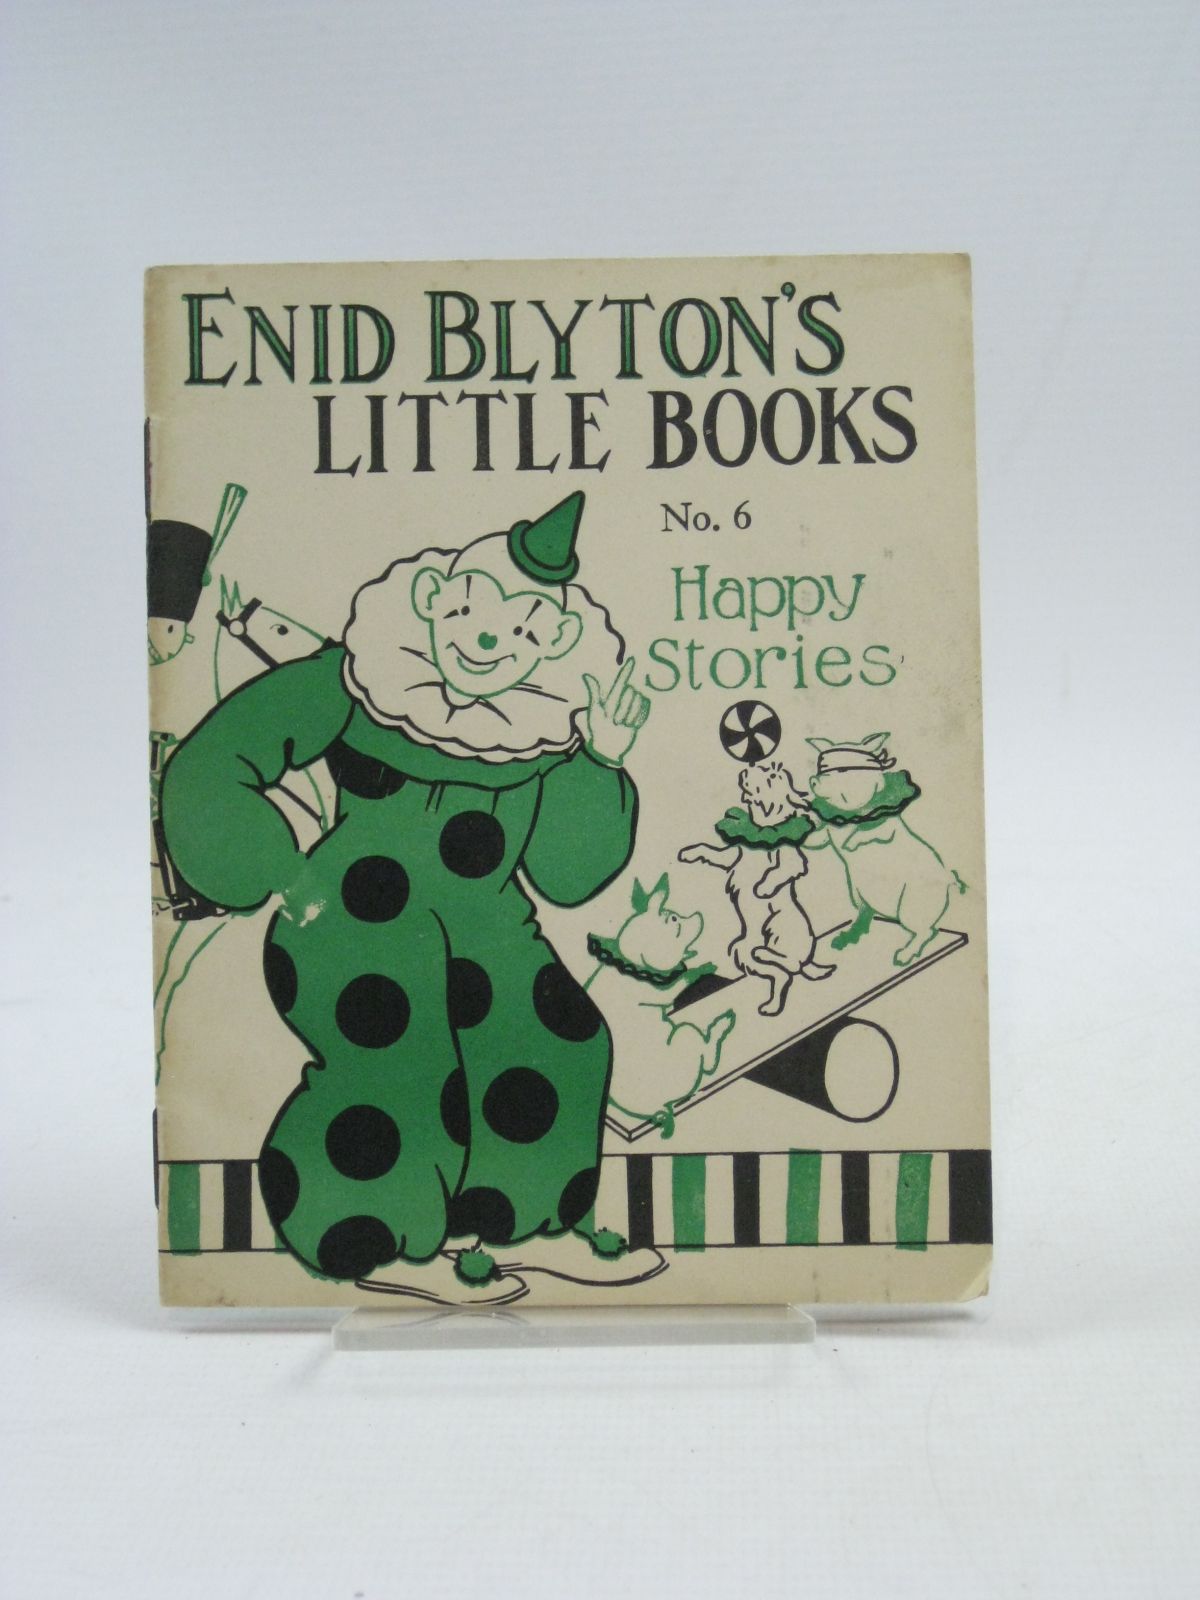 Cover of ENID BLYTON'S LITTLE BOOKS NO. 6 - HAPPY STORIES by Enid Blyton